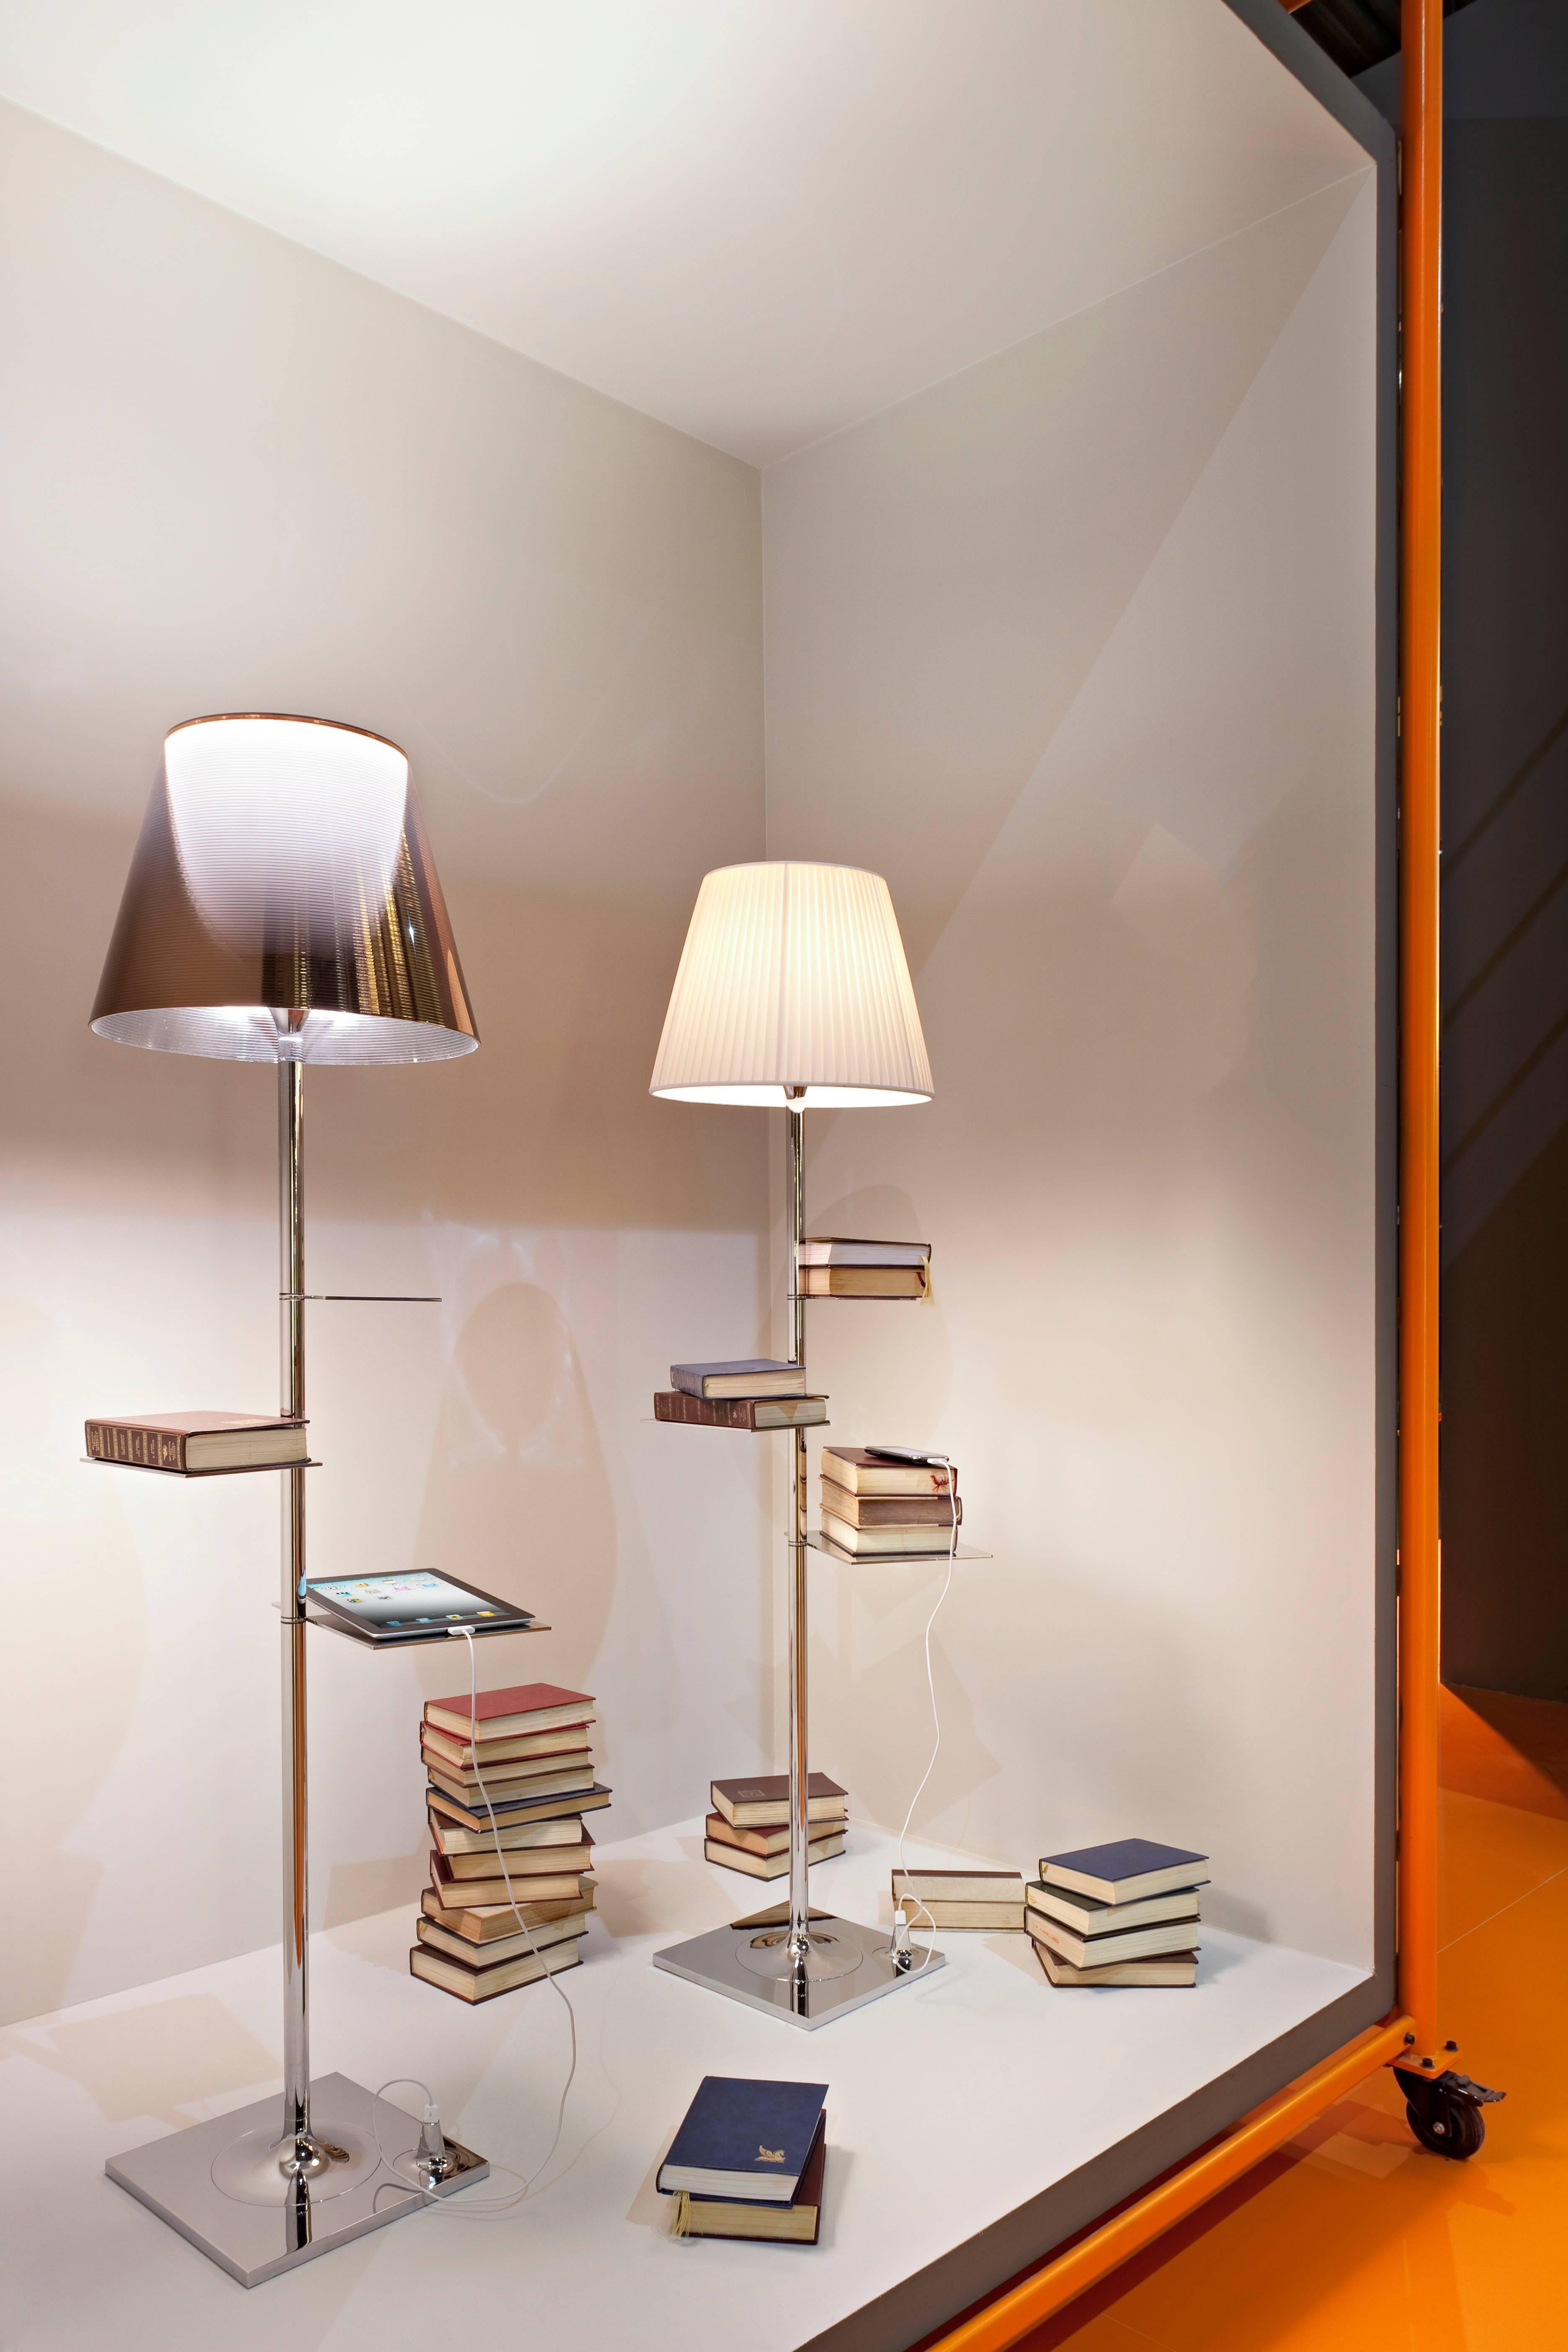 There's more than meets the eye with this 2013 Philippe Starck creation: Illuminating your home with a diffused light, the Biblioteque Nationale also serves as a strikingly modern bookshelf and offers a convenient portable device charger. The base,